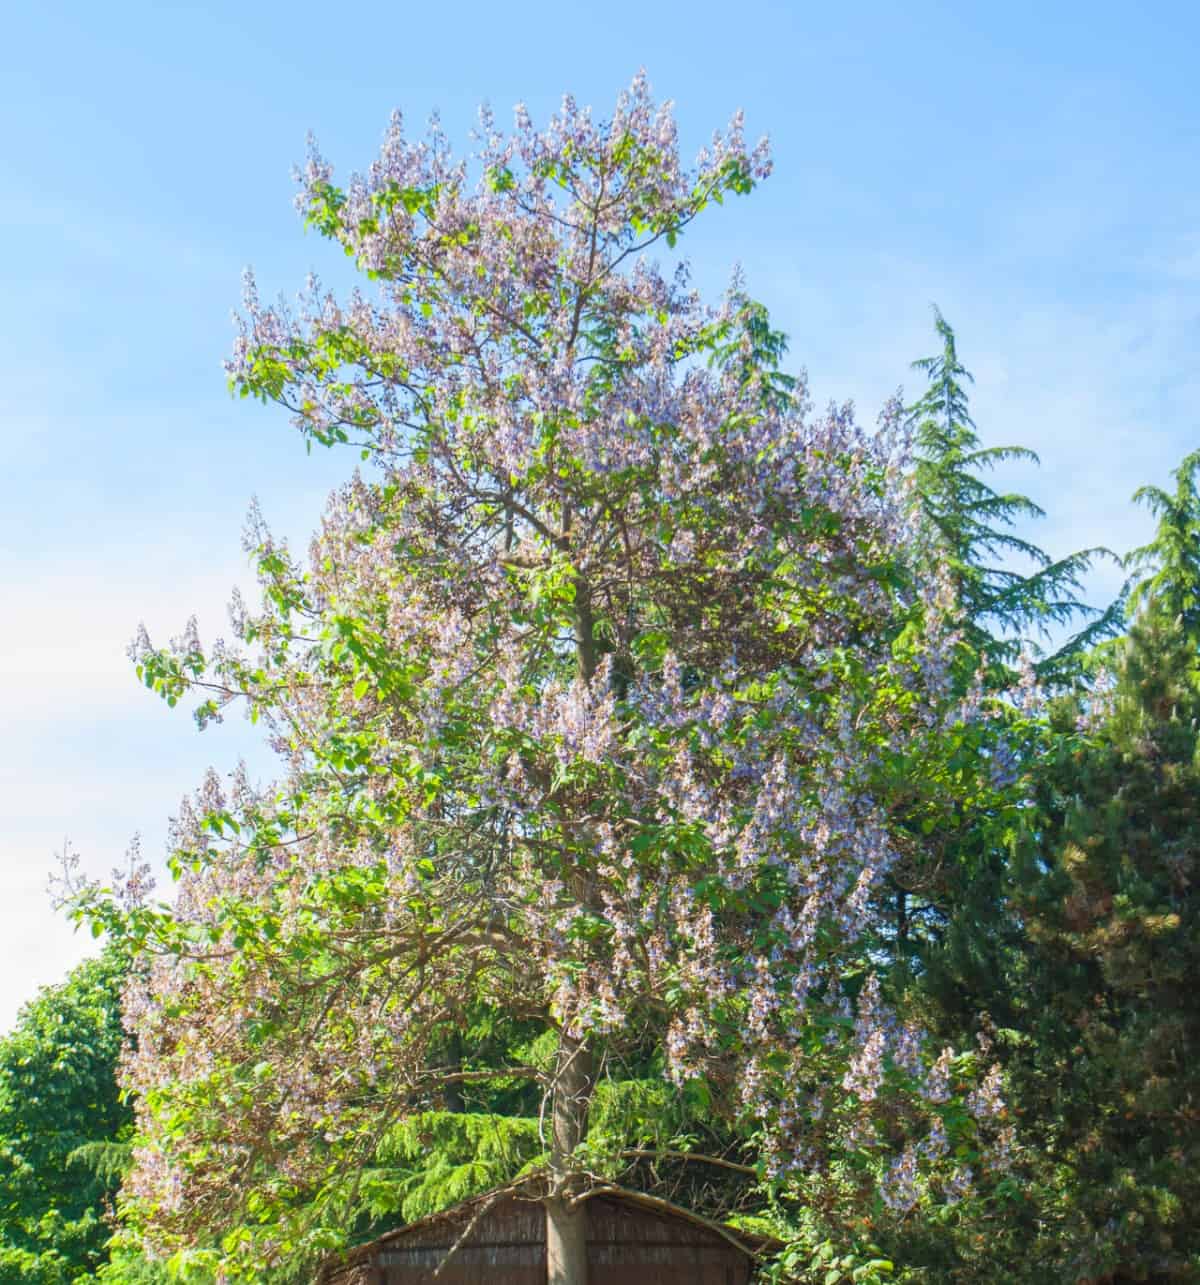 The paulownia grows three feet a year and can become invasive.